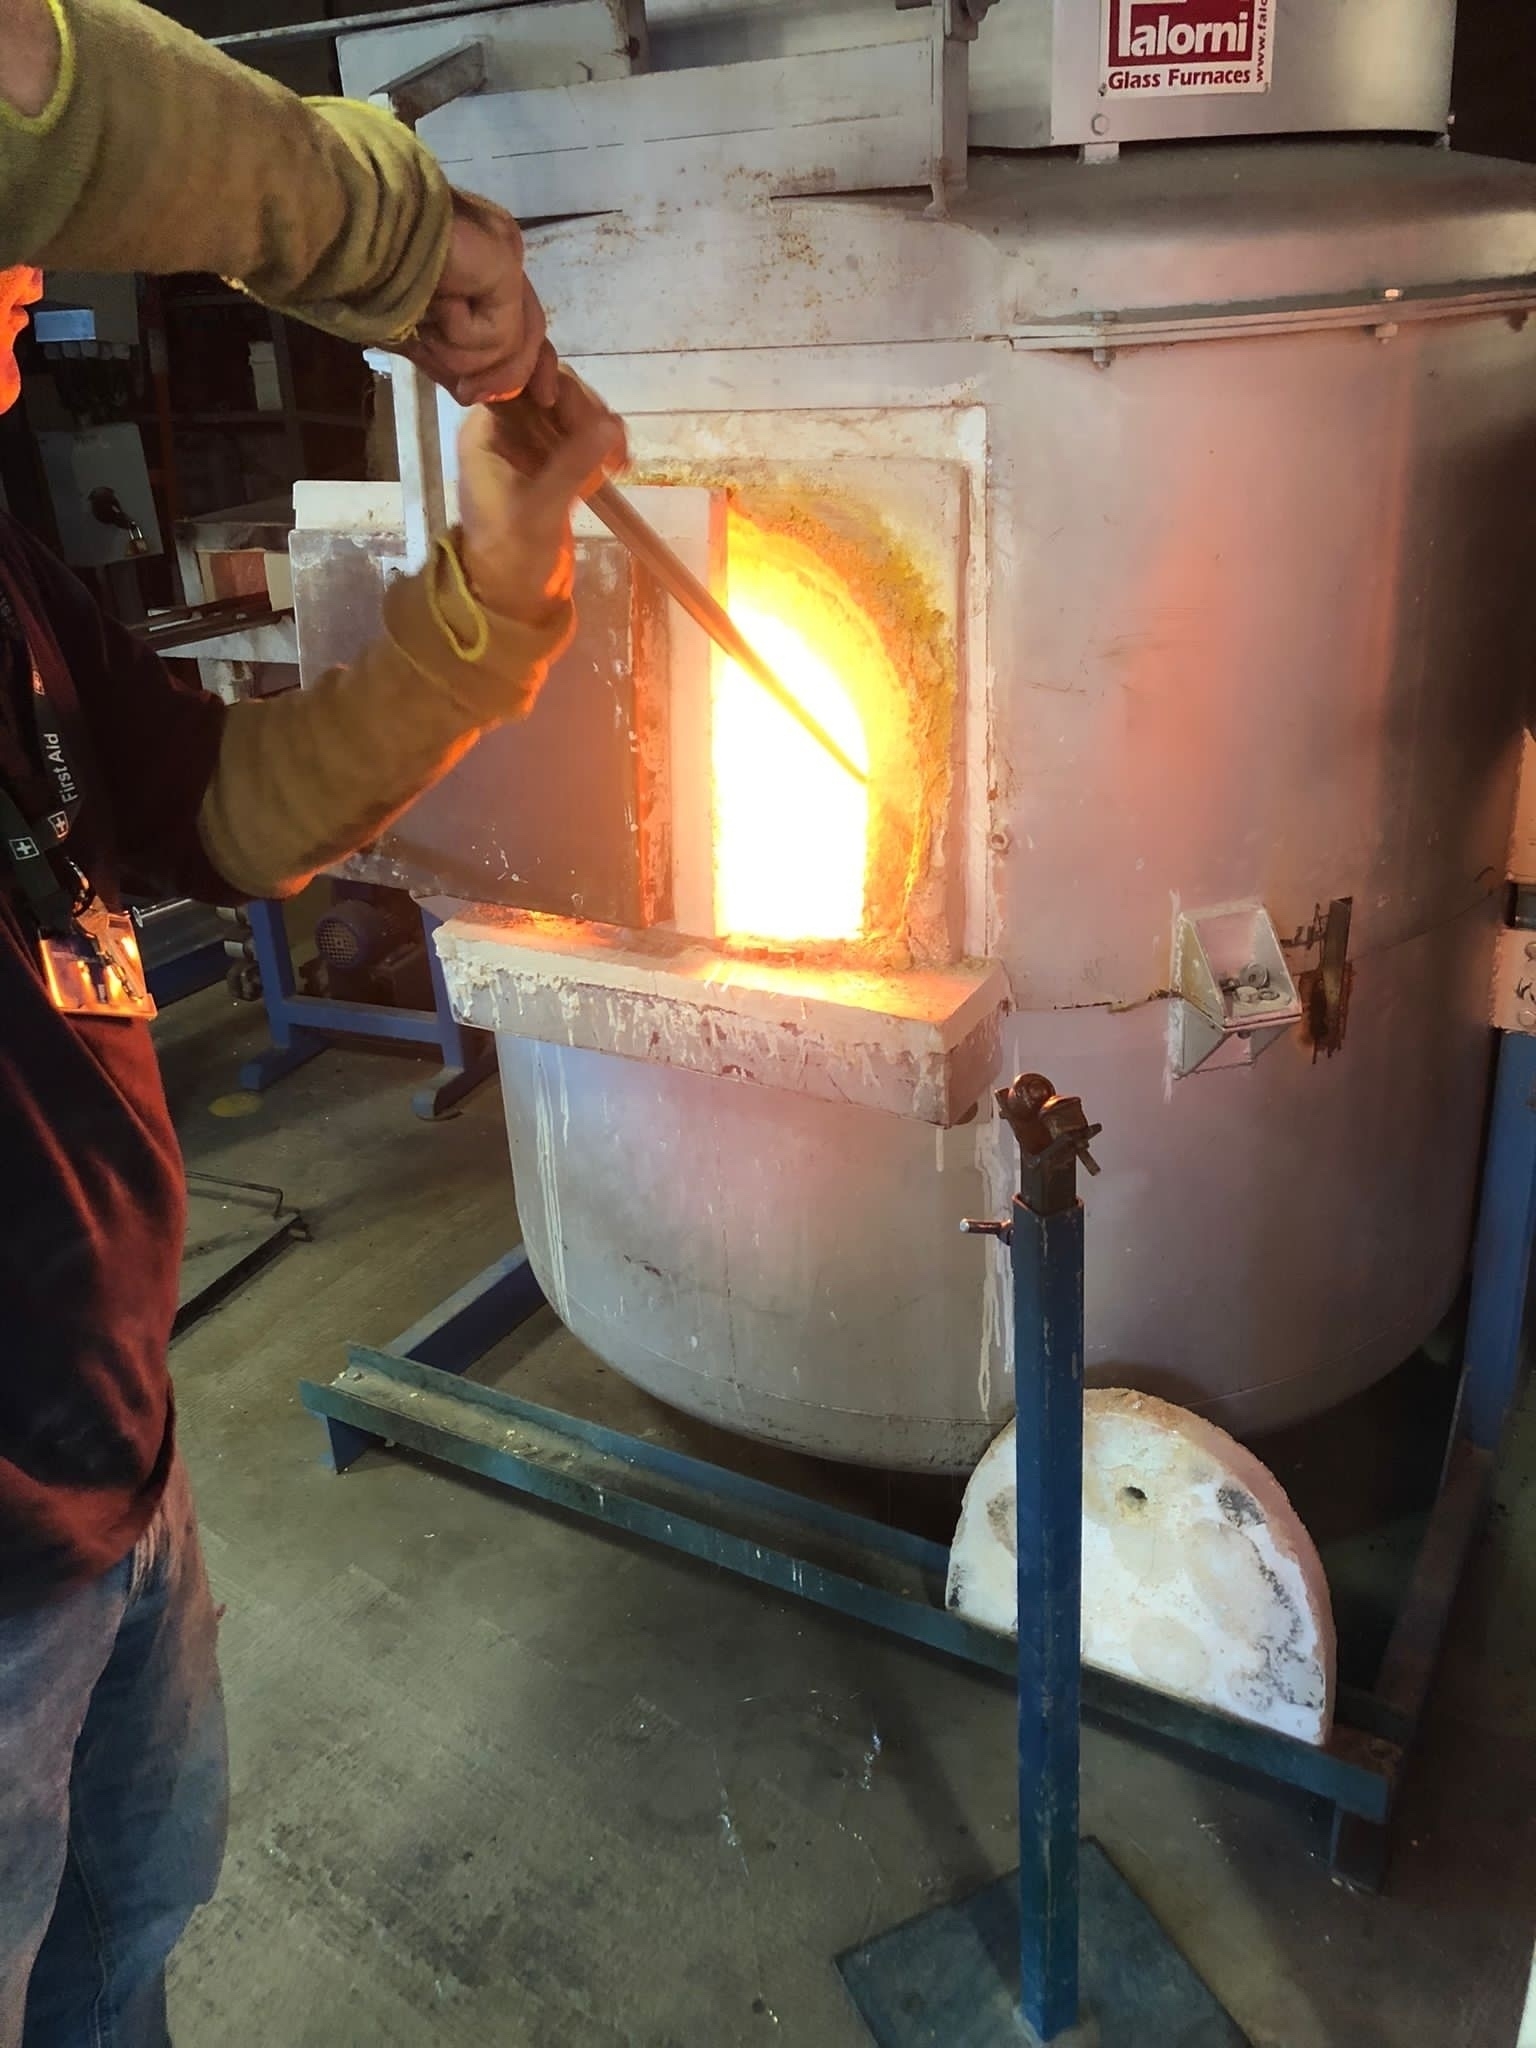 Metal furnace with door partially open and person holding a rod in the glowing heat.